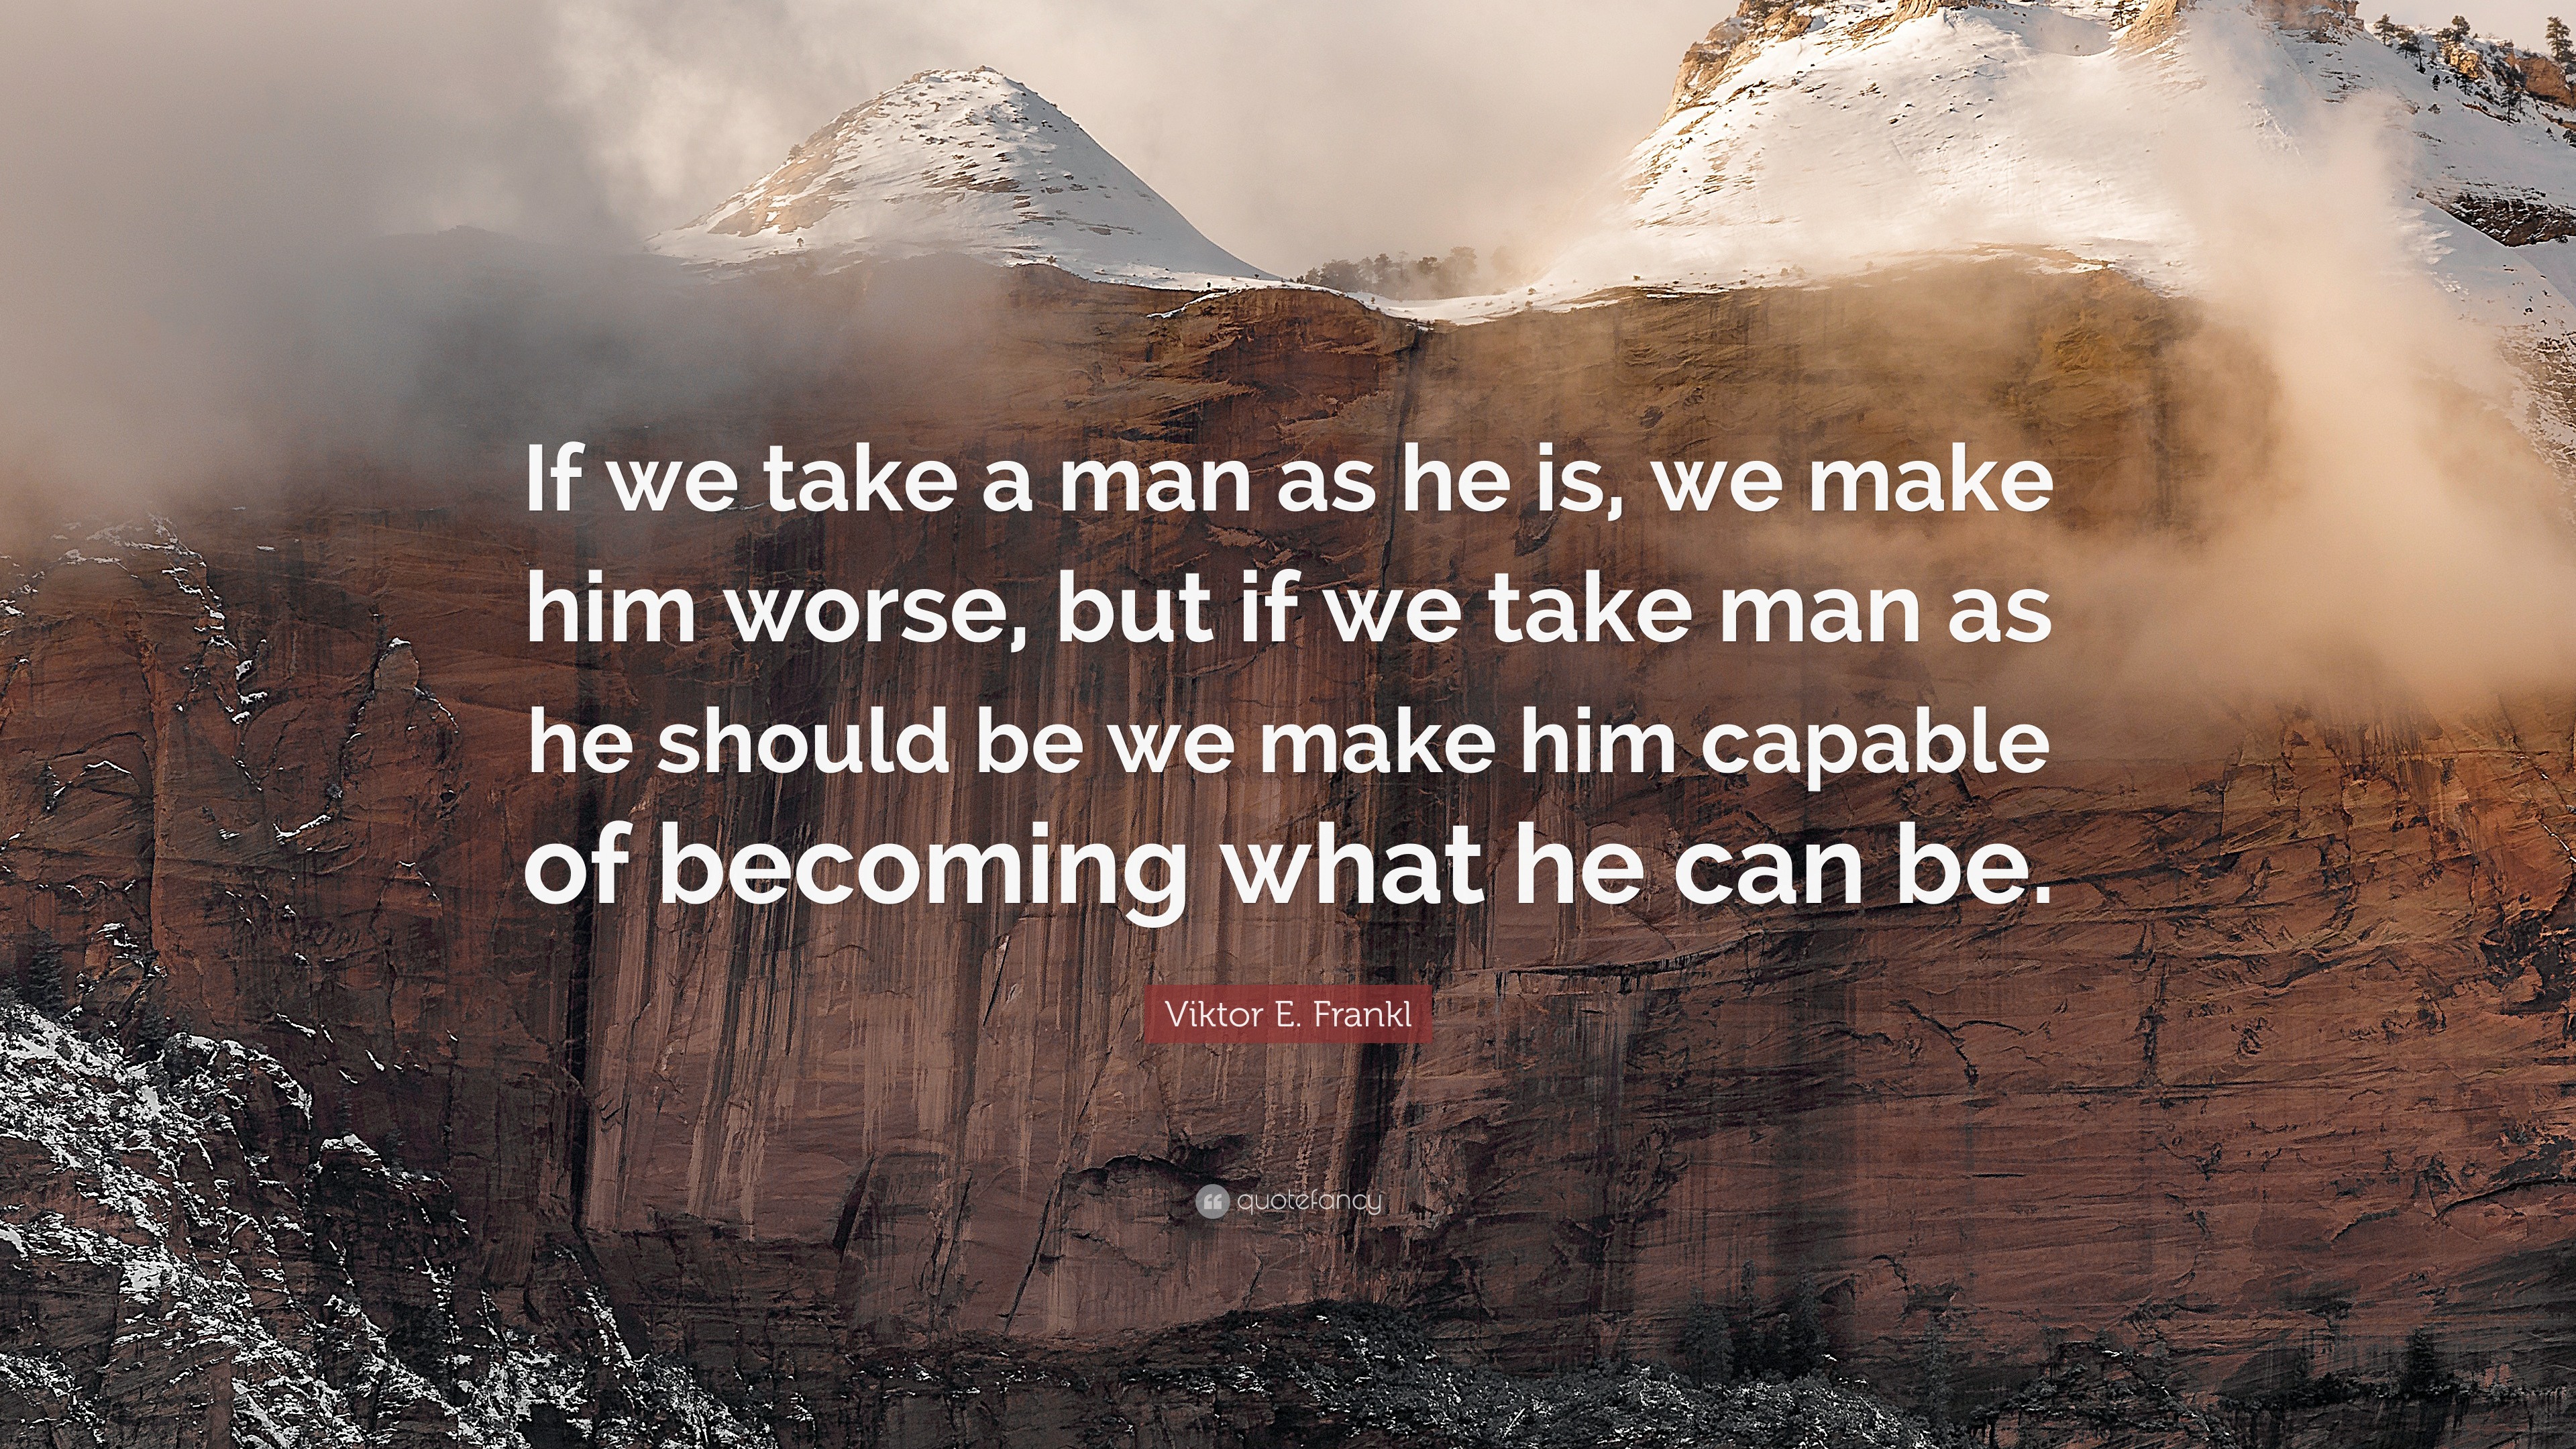 Viktor E. Frankl Quote: “If we take a man as he is, we make him worse,